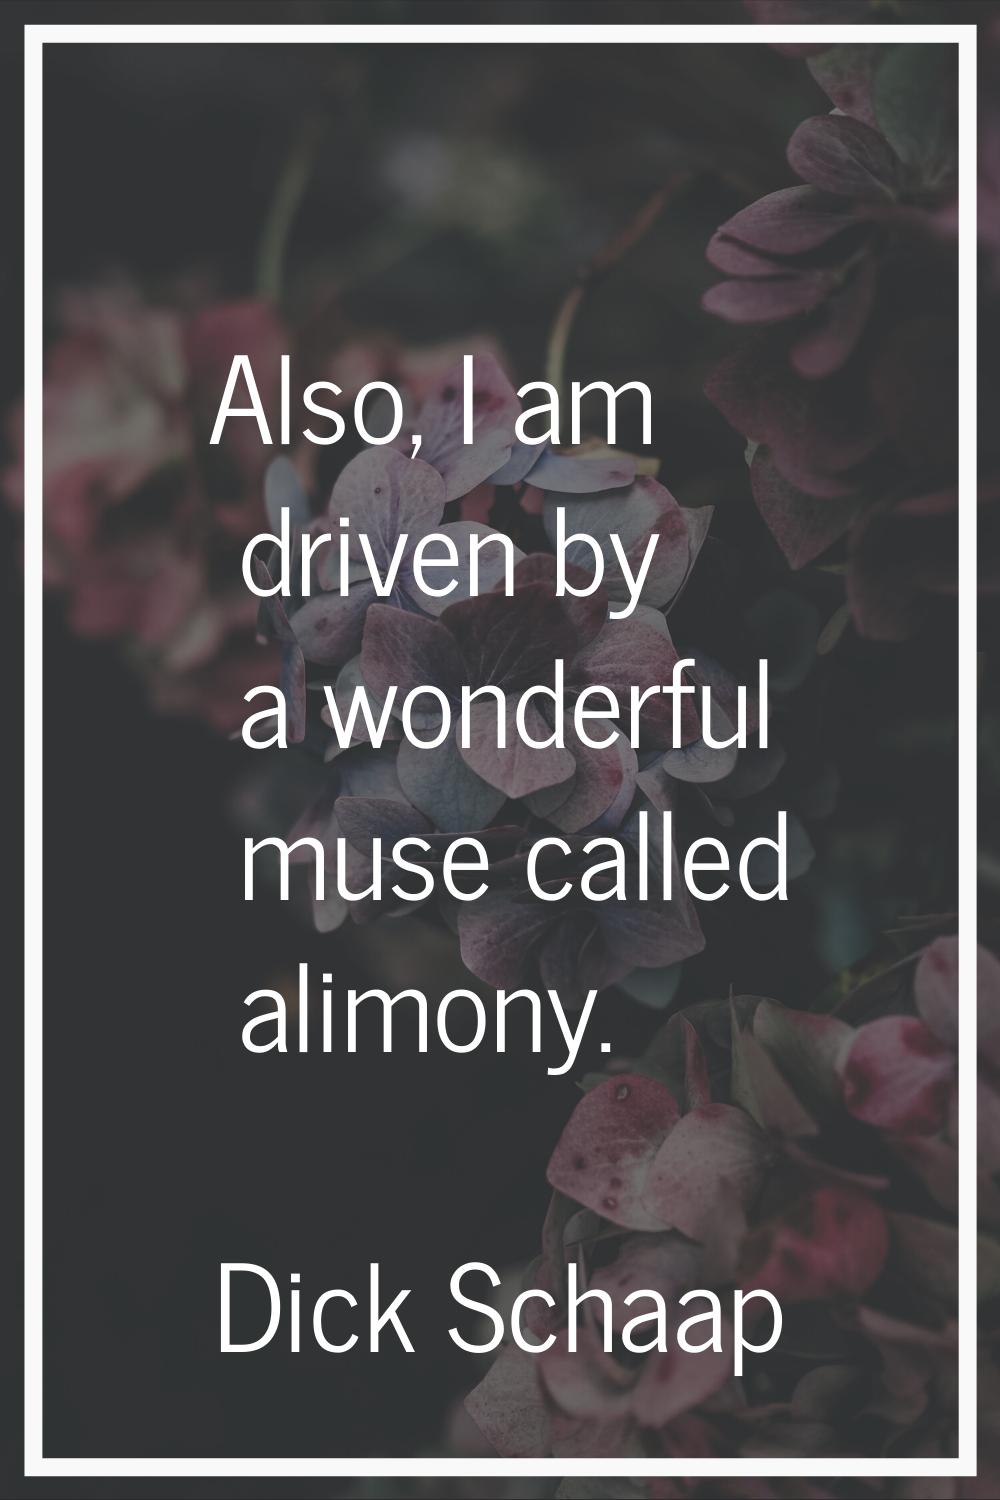 Also, I am driven by a wonderful muse called alimony.